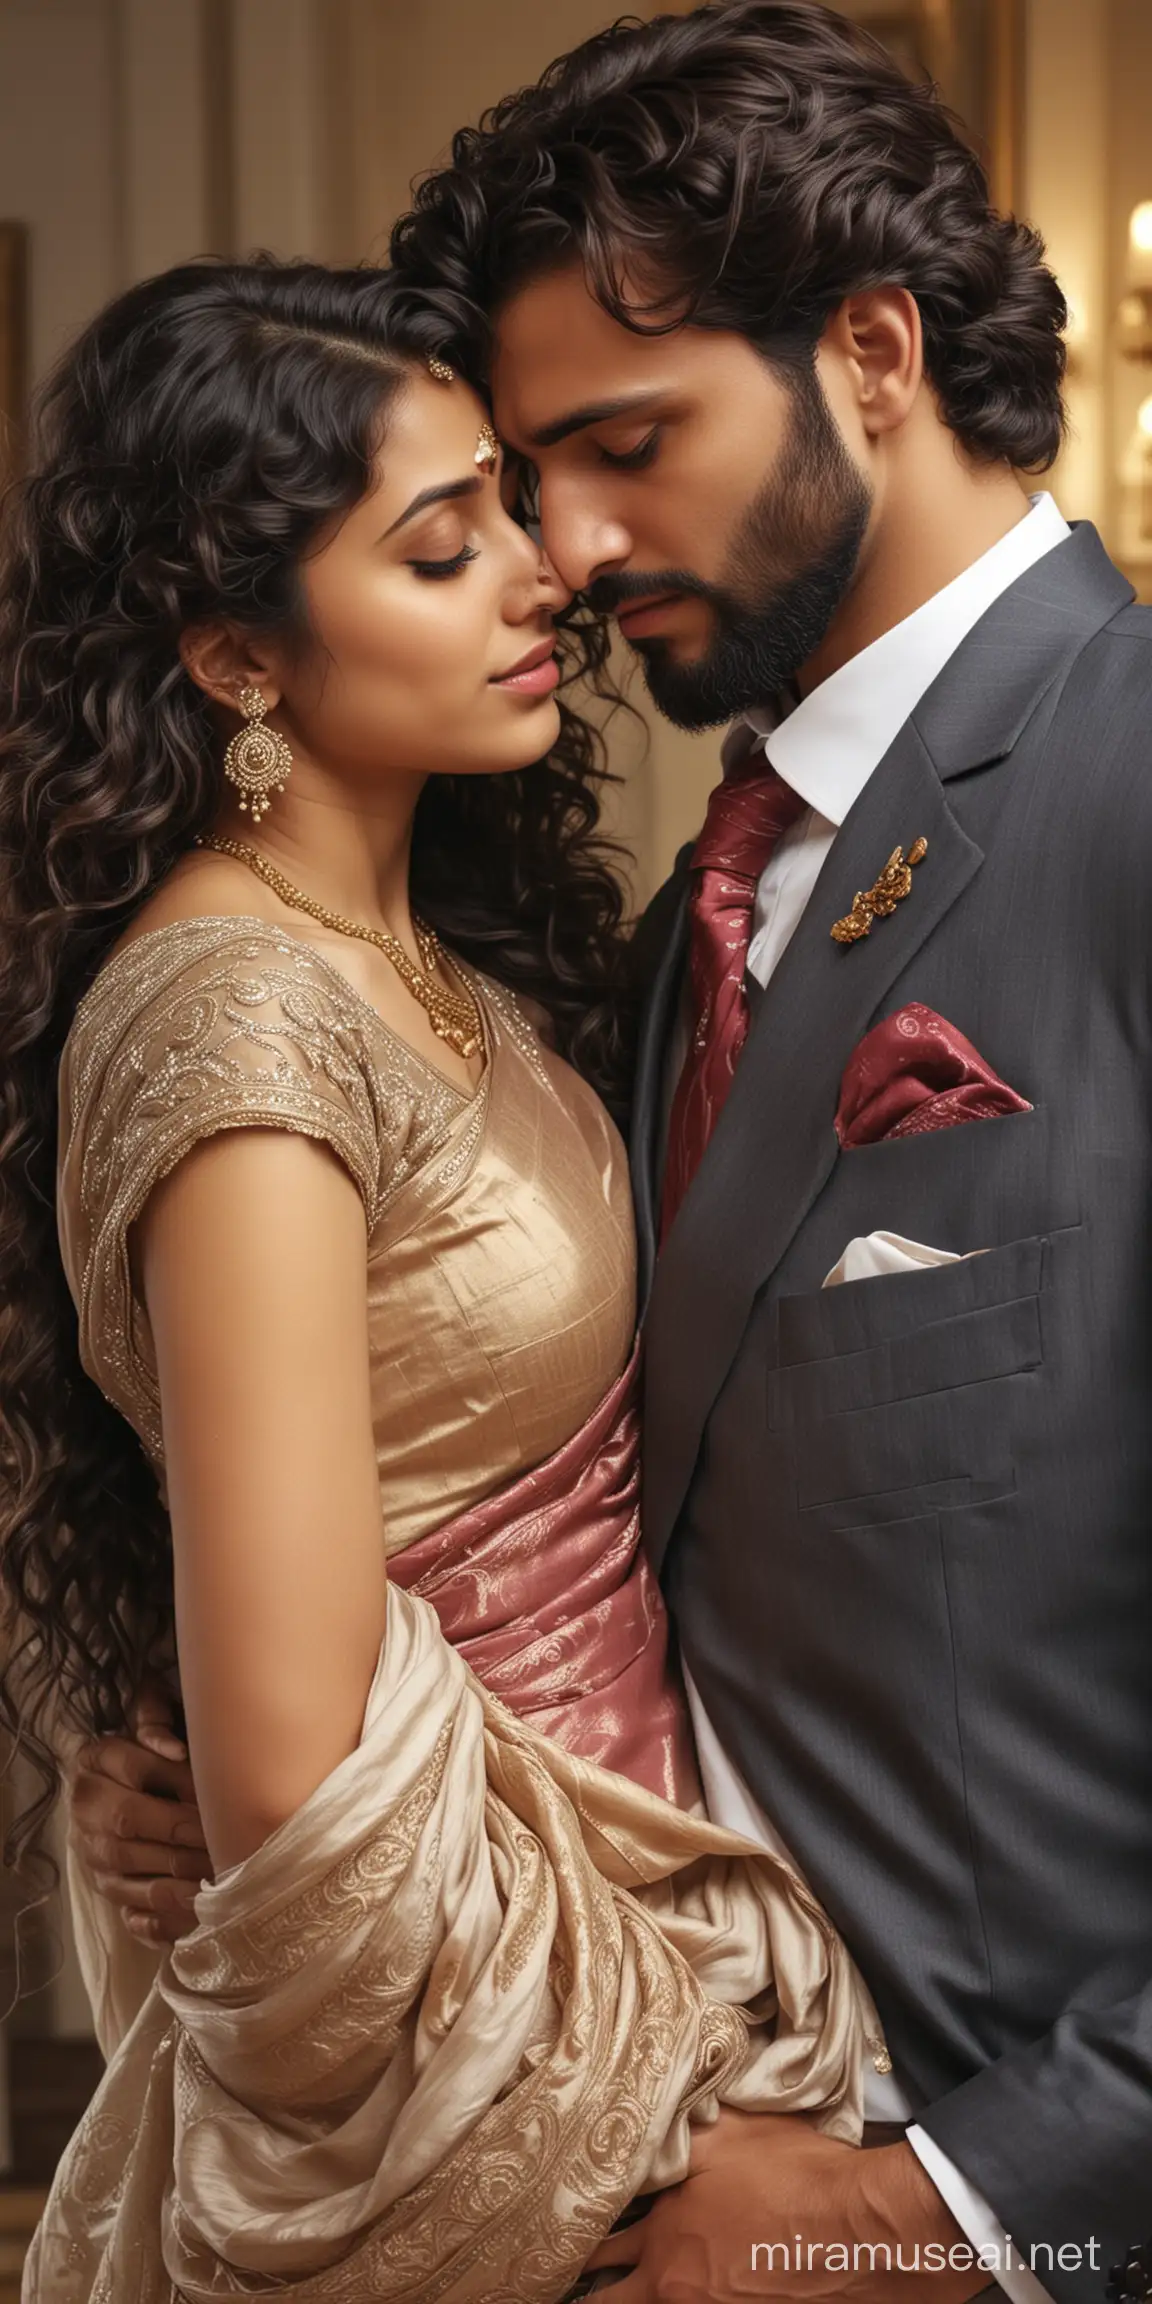 couple, most handsome full body photo of  elegant european male,  formals with tie,  elegant and arrogant looks,  beard,  most beautiful cute indian girl, elegant saree, curly long hair,  head resting on shoulder shoulder  with emotion and crying bursting, weeping  with tears, low cut back, man comforting her holding her back, 
photo realistic, 4k.